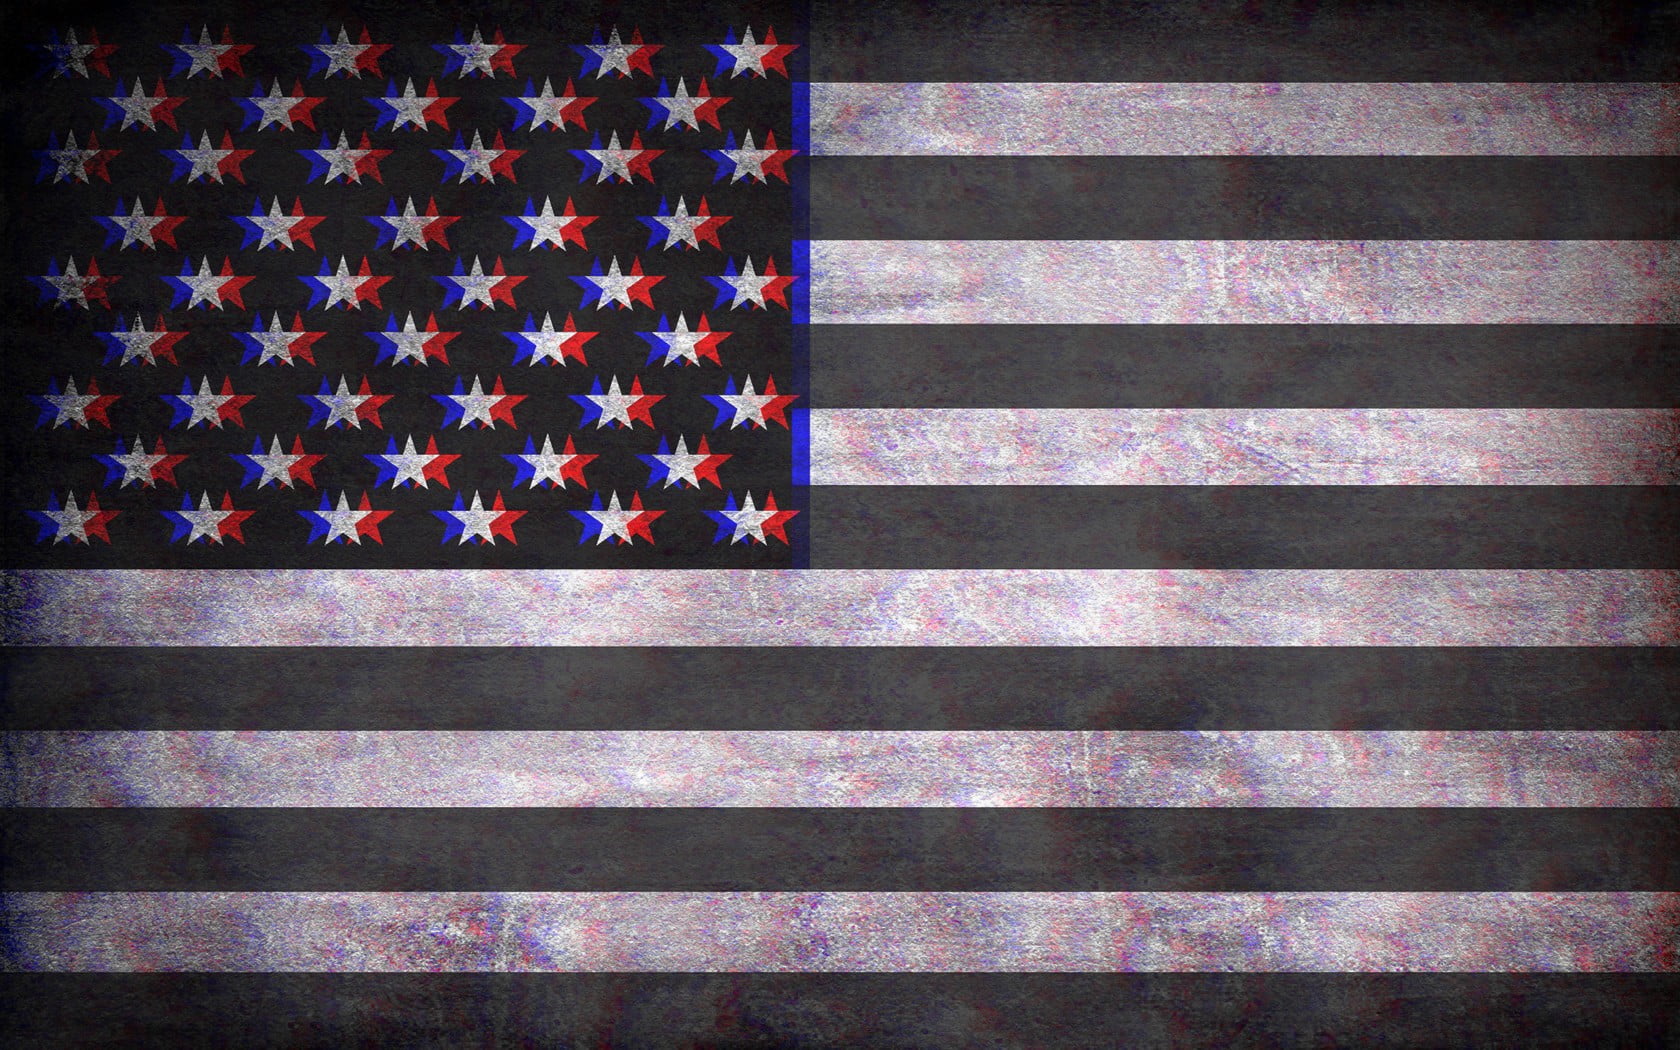 grayscale photo of US flag, American flag, anaglyph 3D